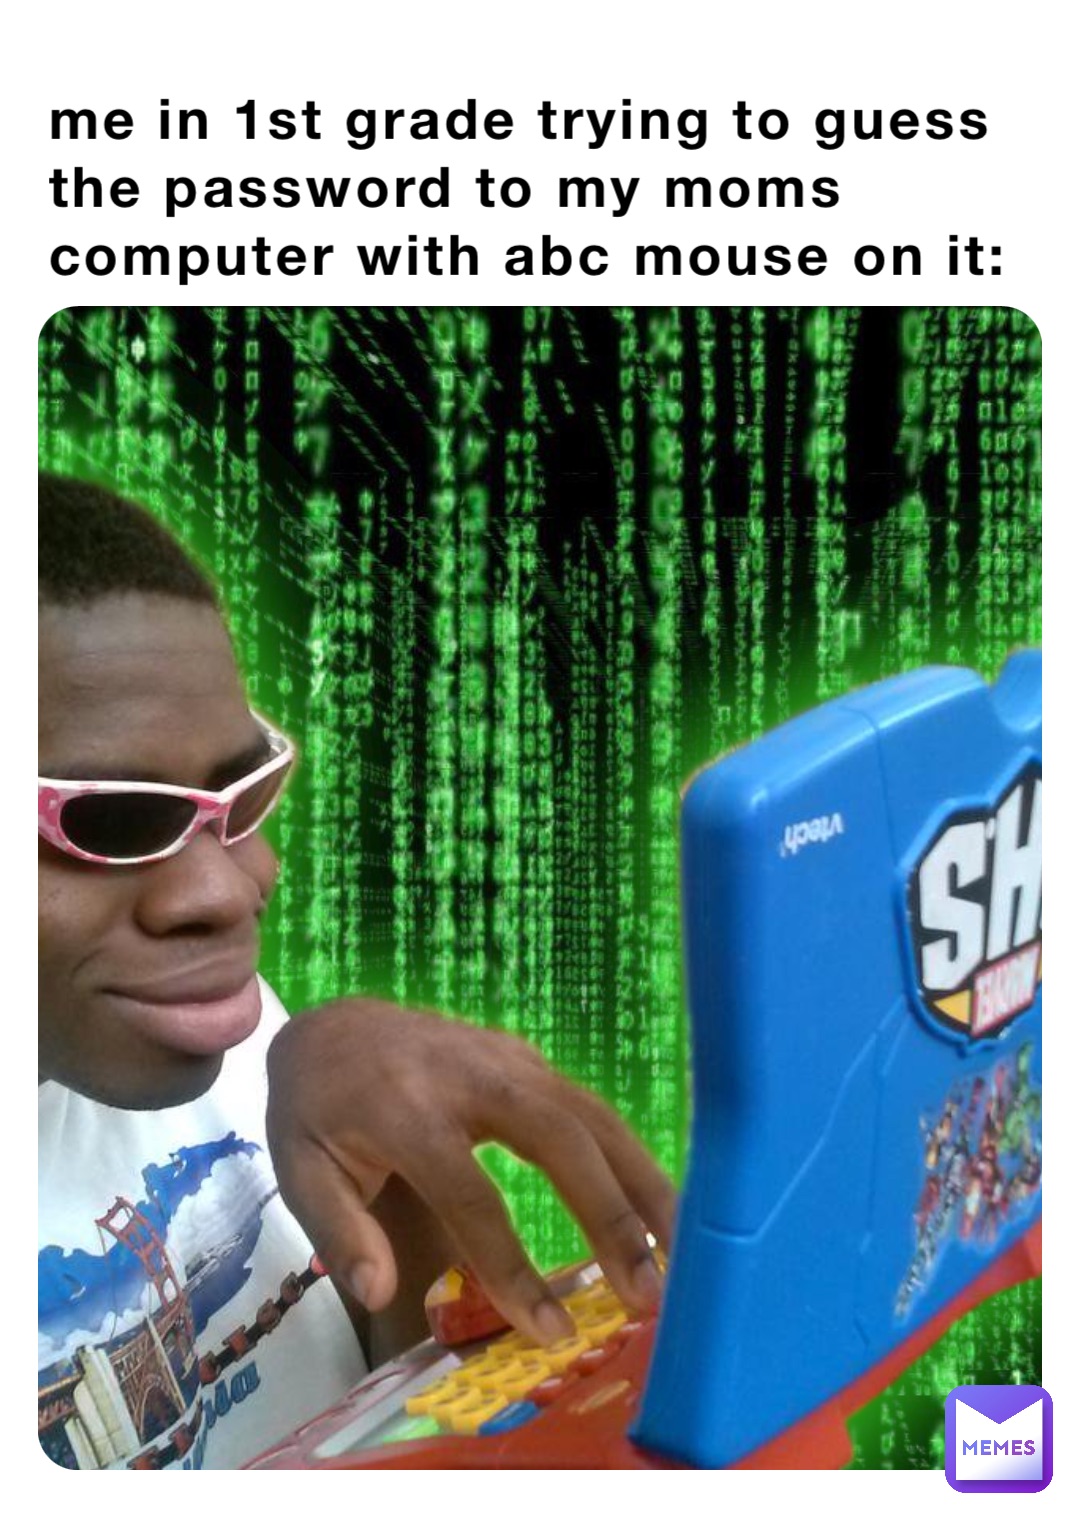 Me in 1st grade trying to guess the password to my moms computer with ABC mouse on it: